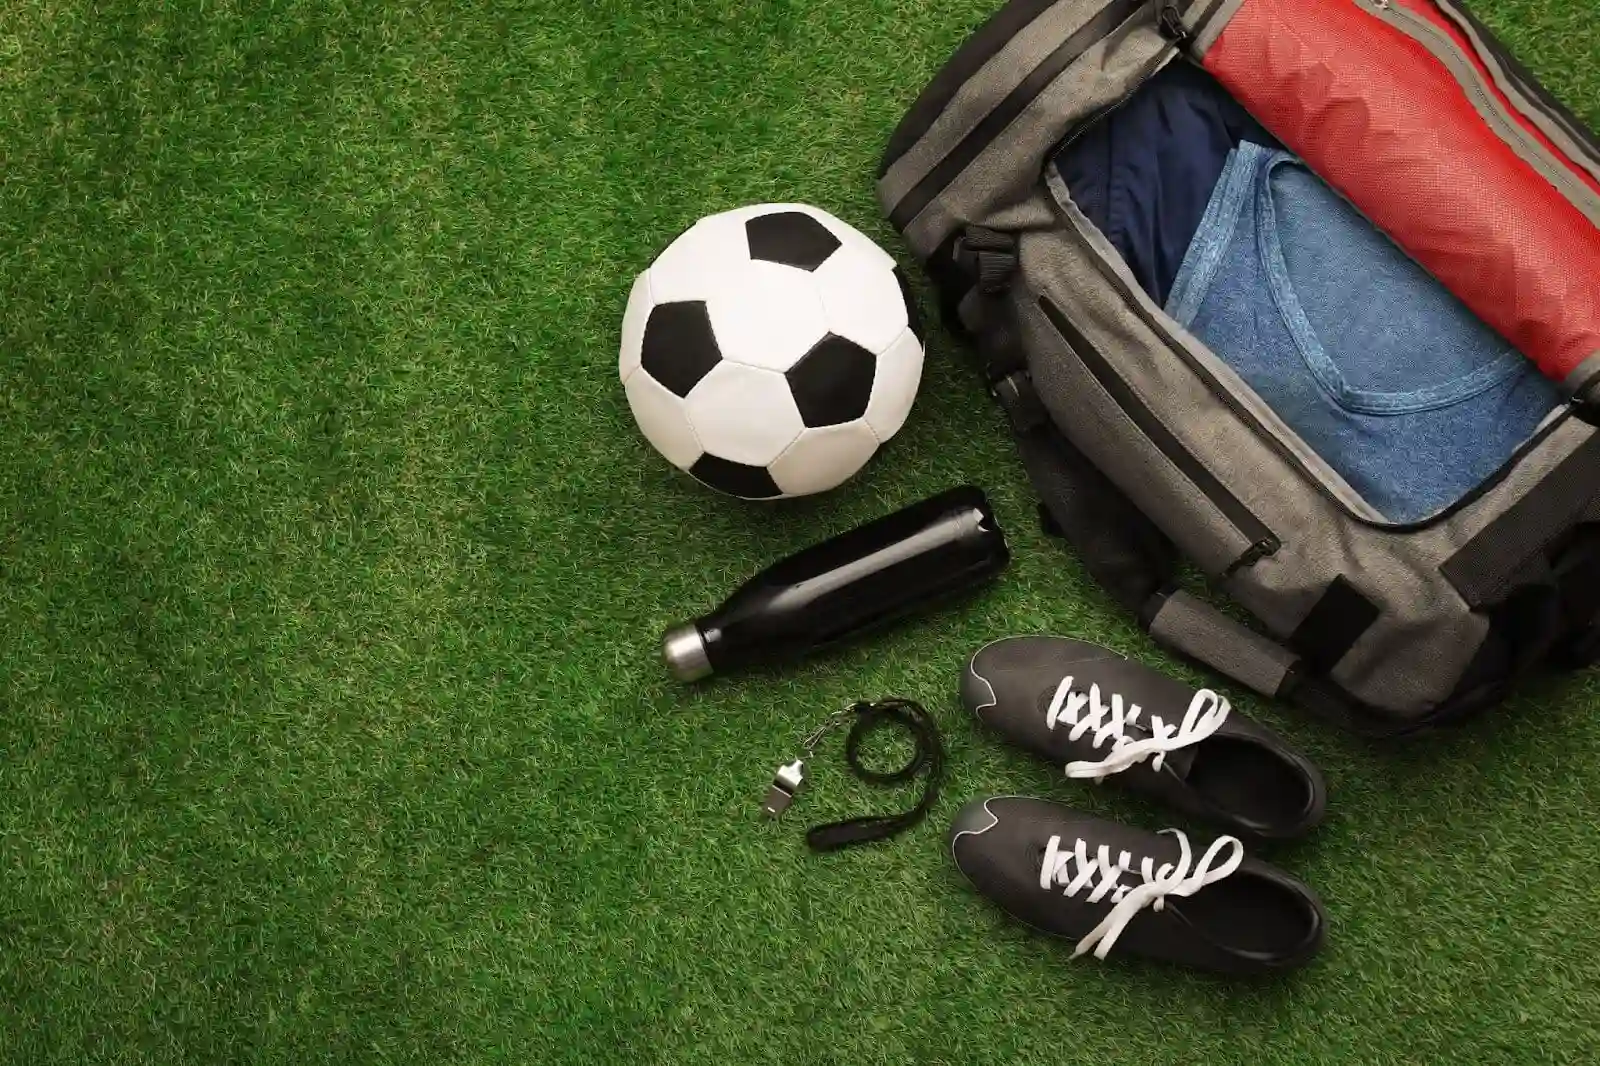 Soccer gear buying guide for beginners